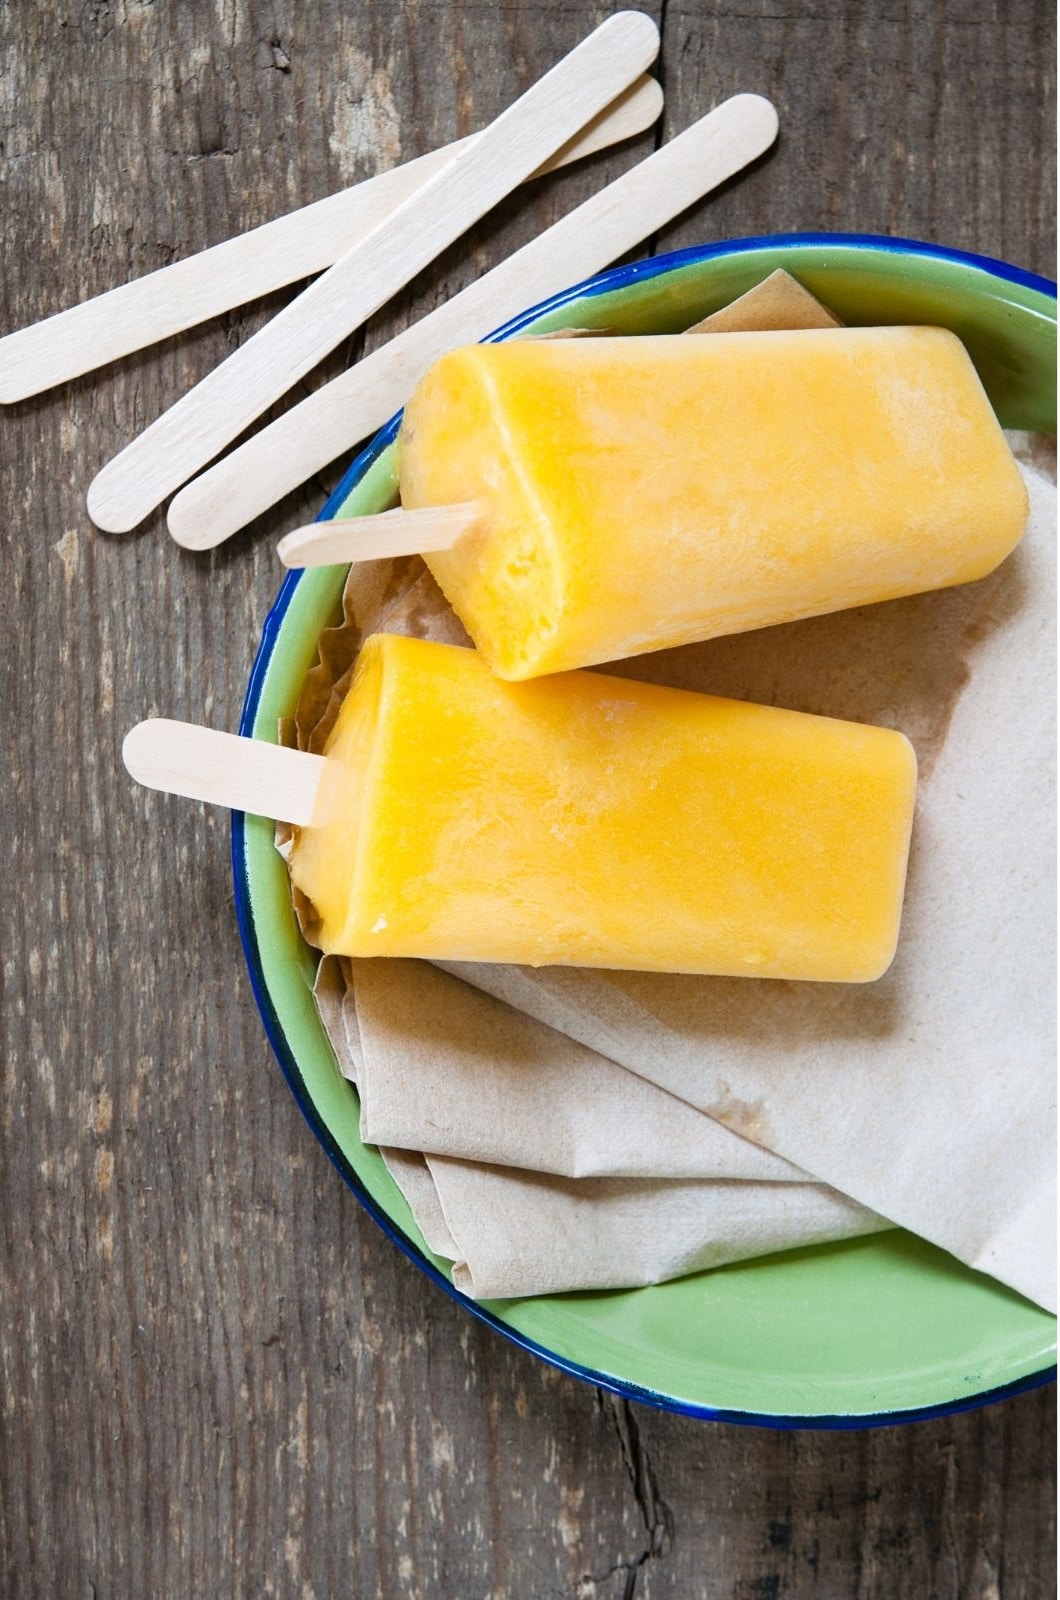 mango ice pops on a green plate wih wooden popsicle sticks